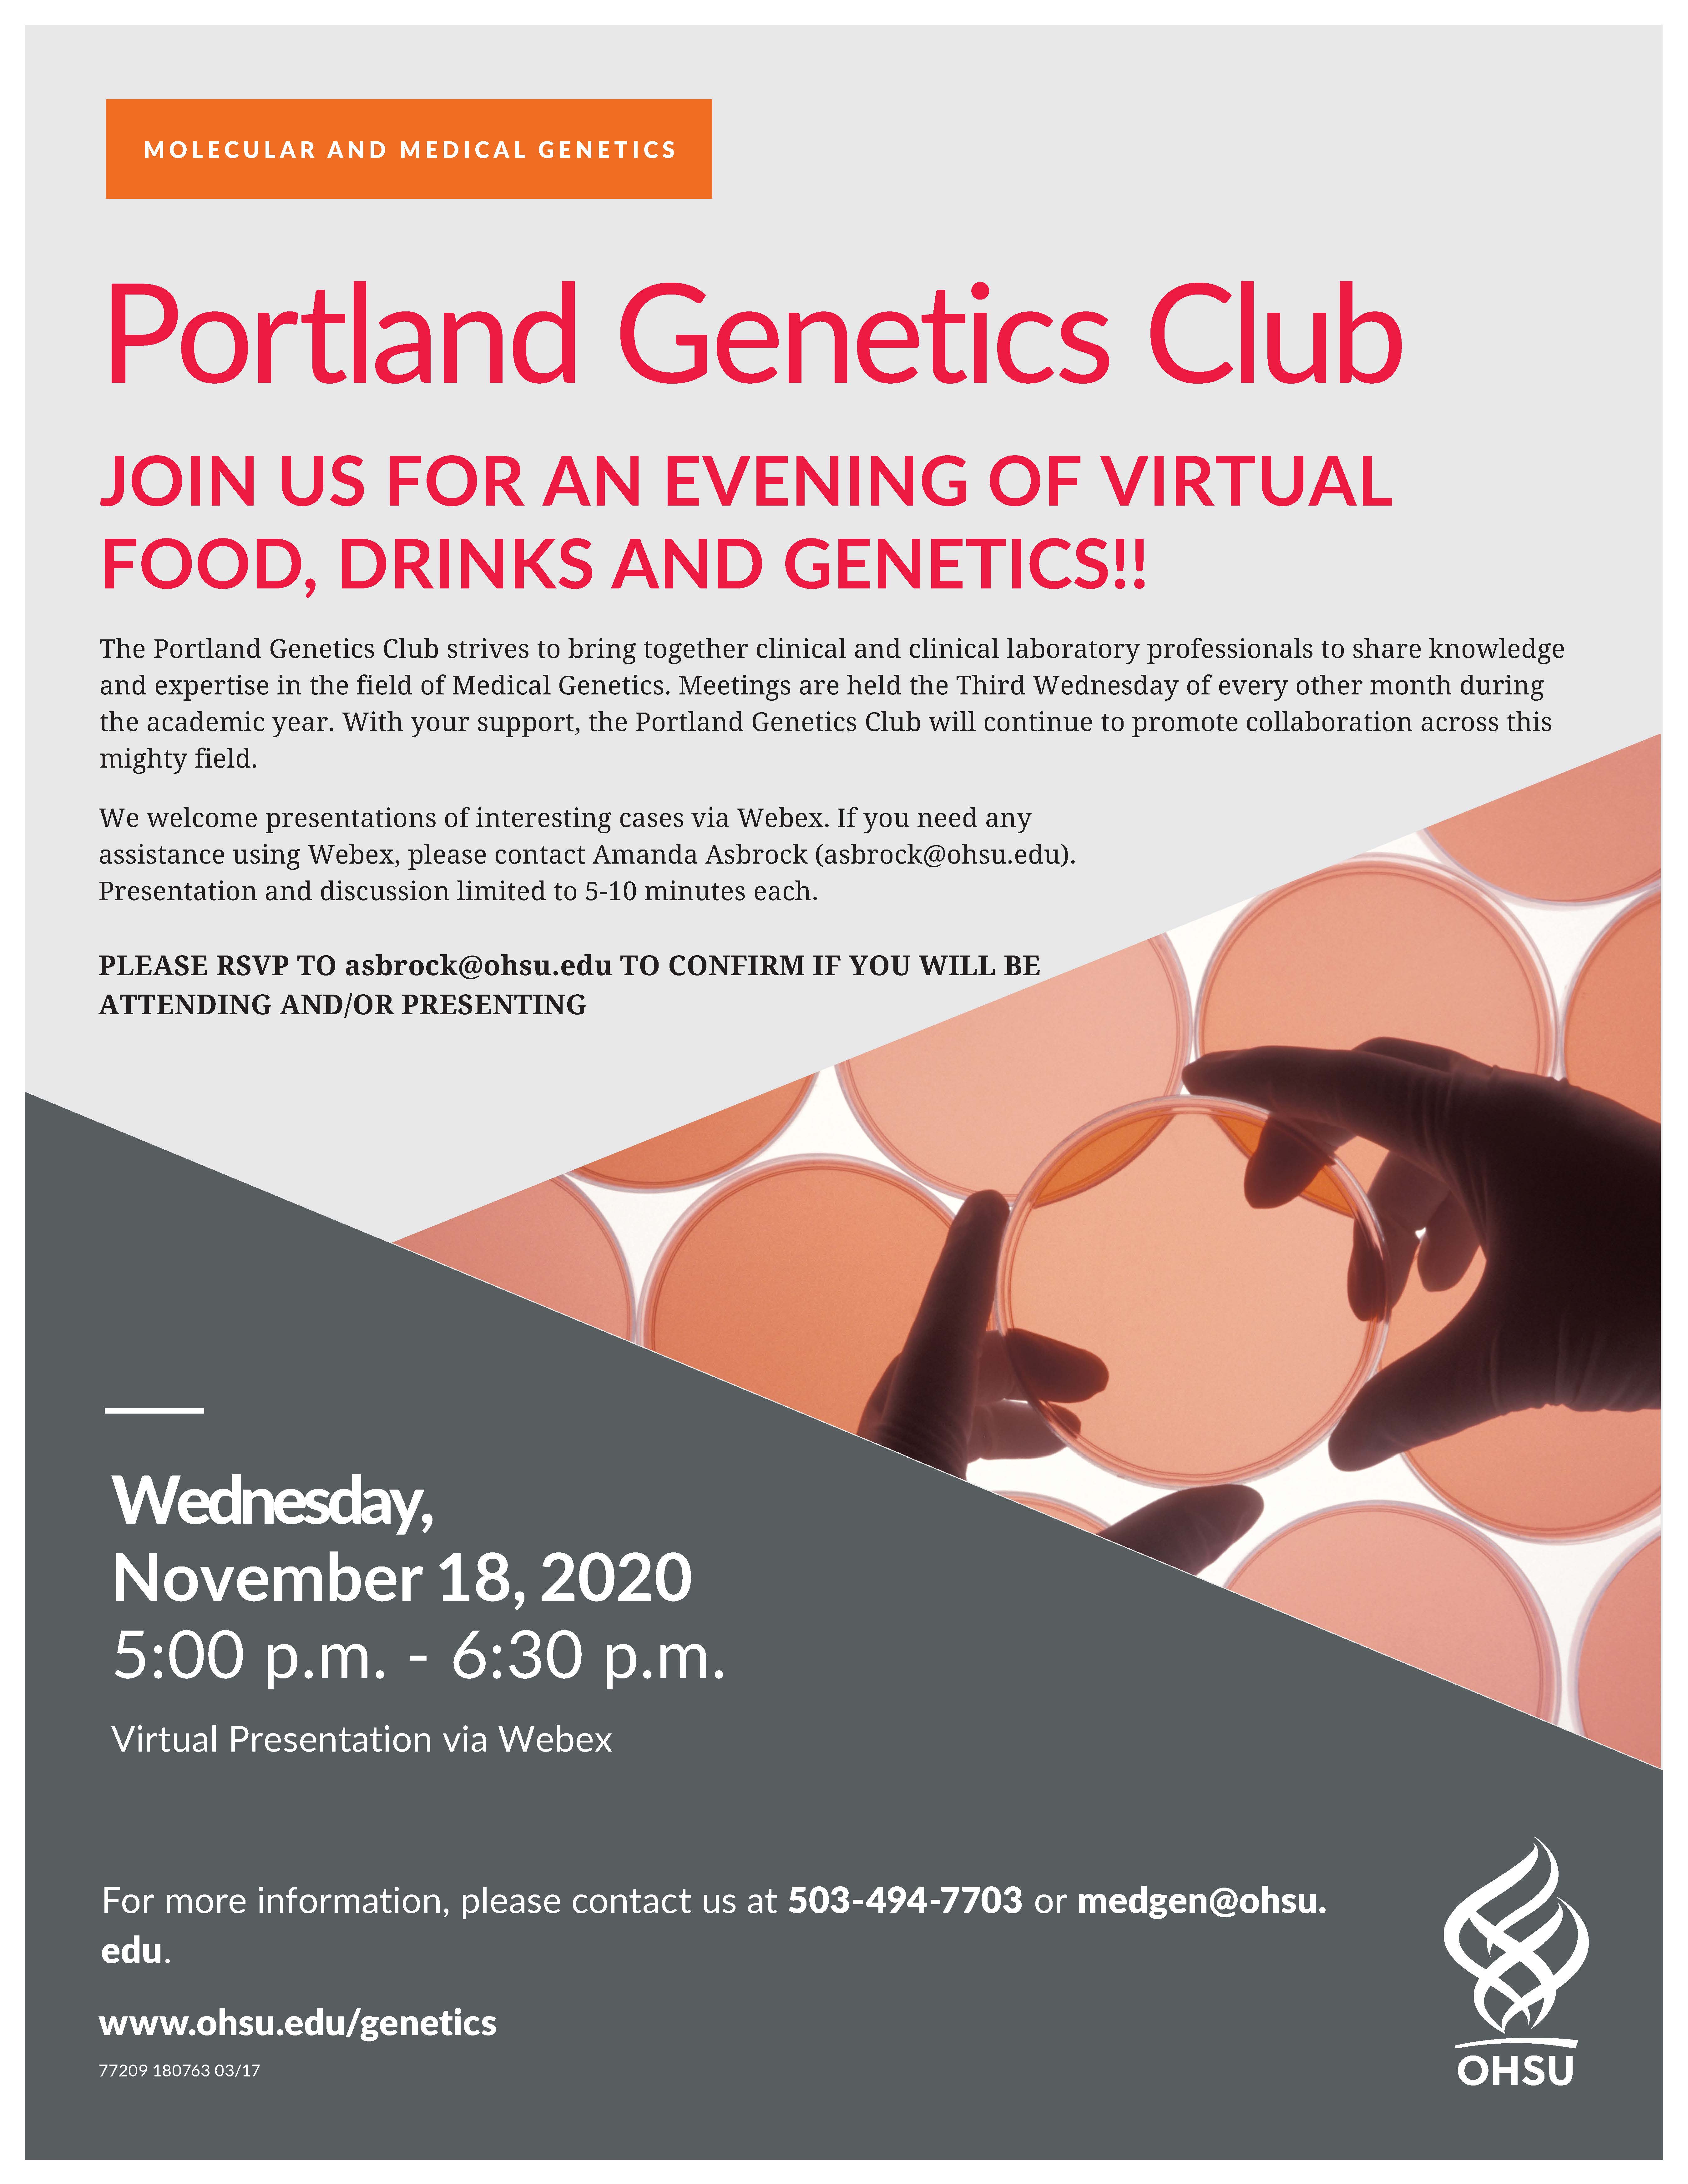 JOIN US FOR AN EVENING OF VIRTUAL FOOD, DRINKS AND GENETICS!!